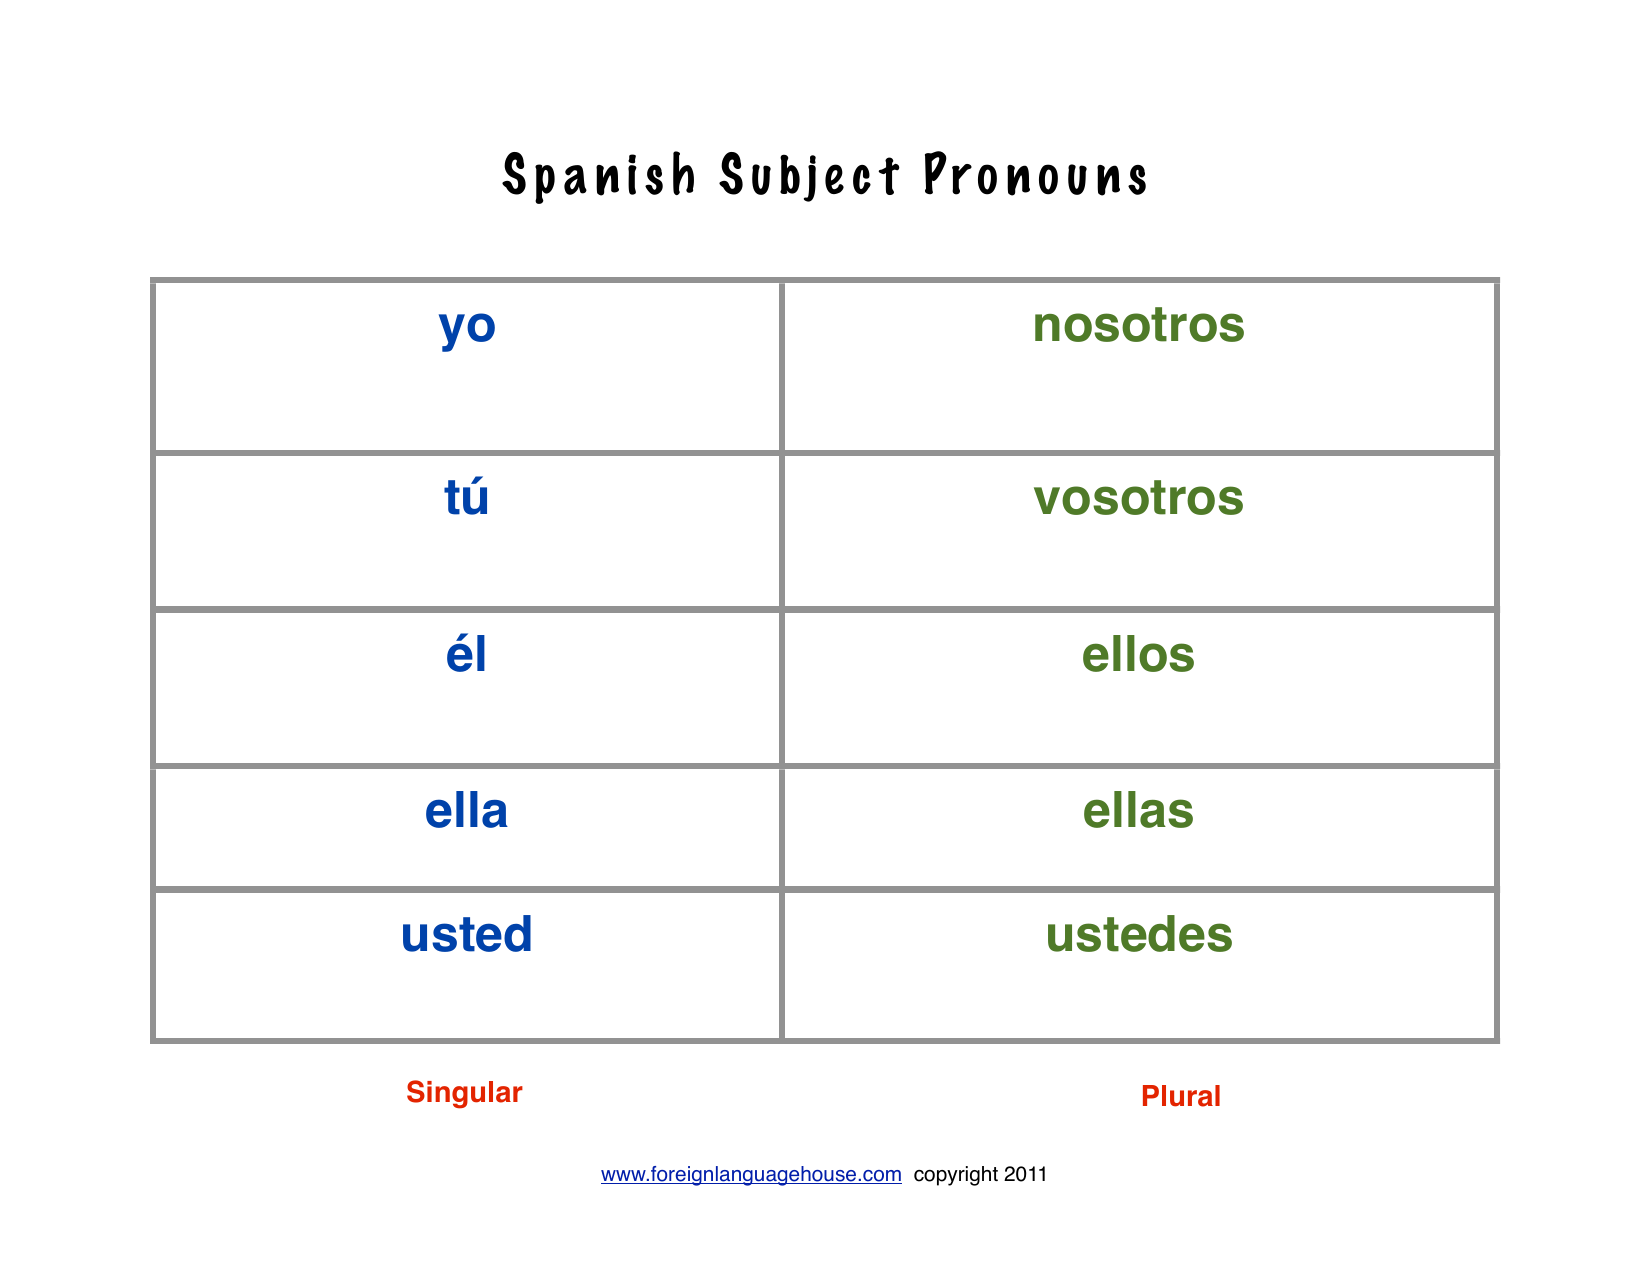 what do formal mean in spanish